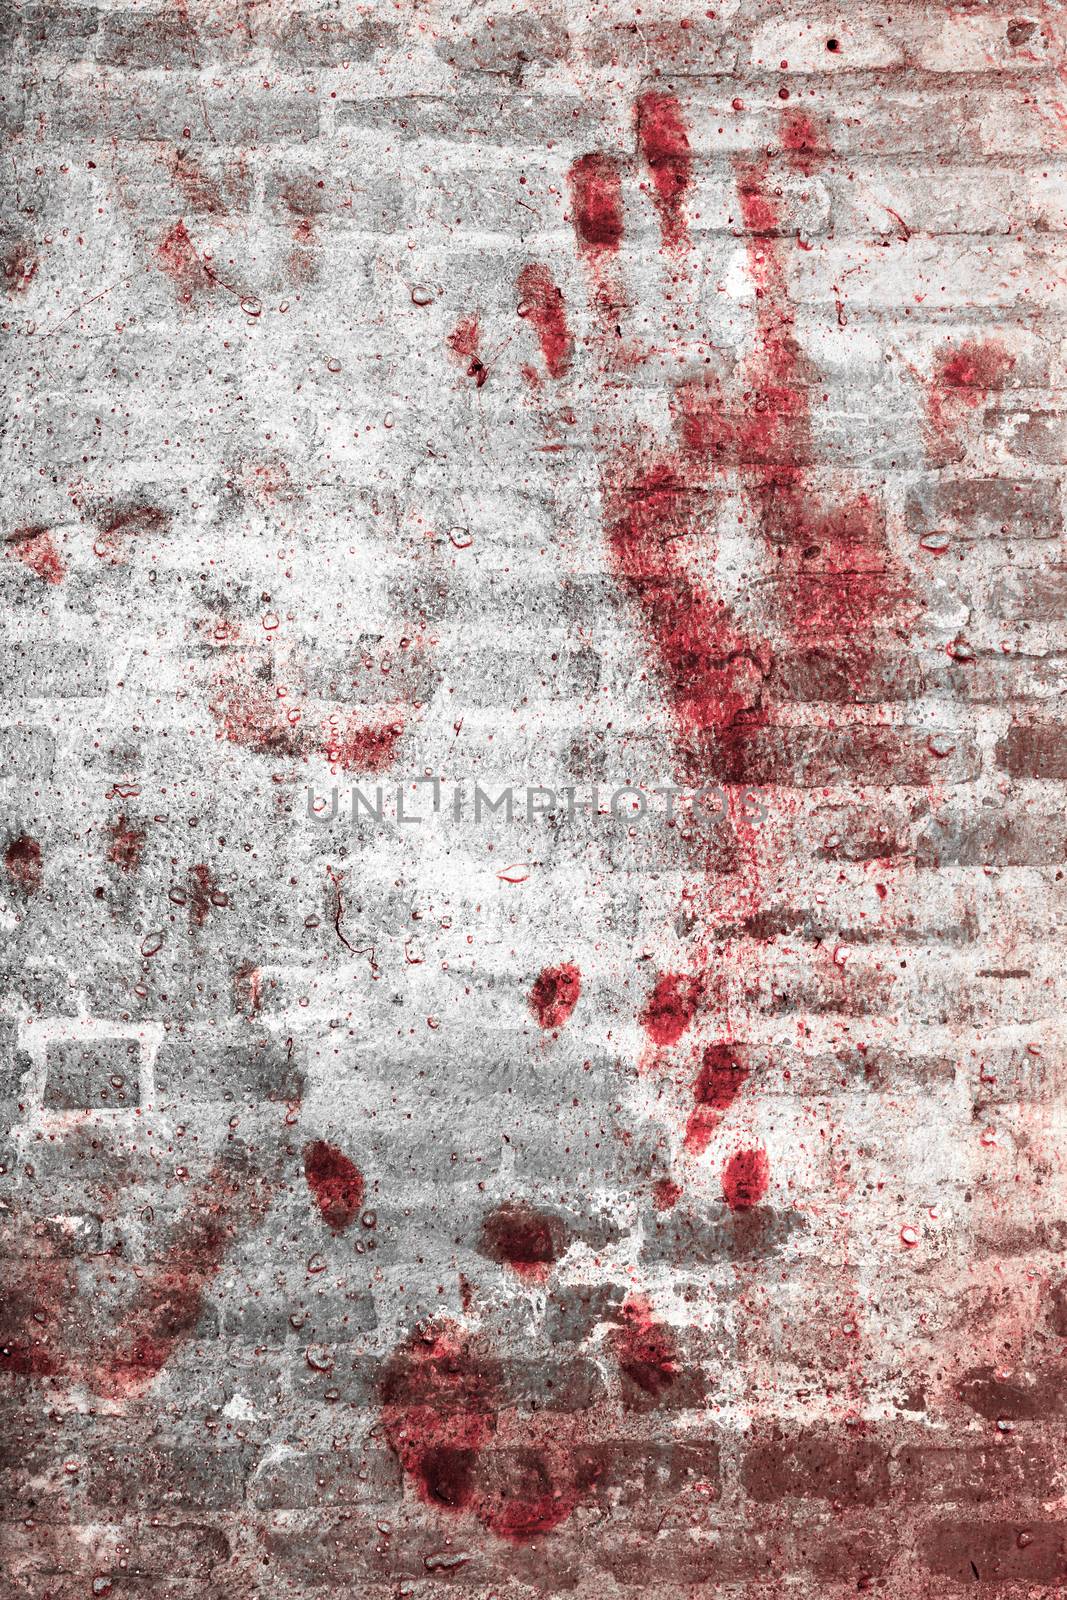 Bloody handprints and blotches of blood on grunge wall. Background for spooky content, halloween and more.